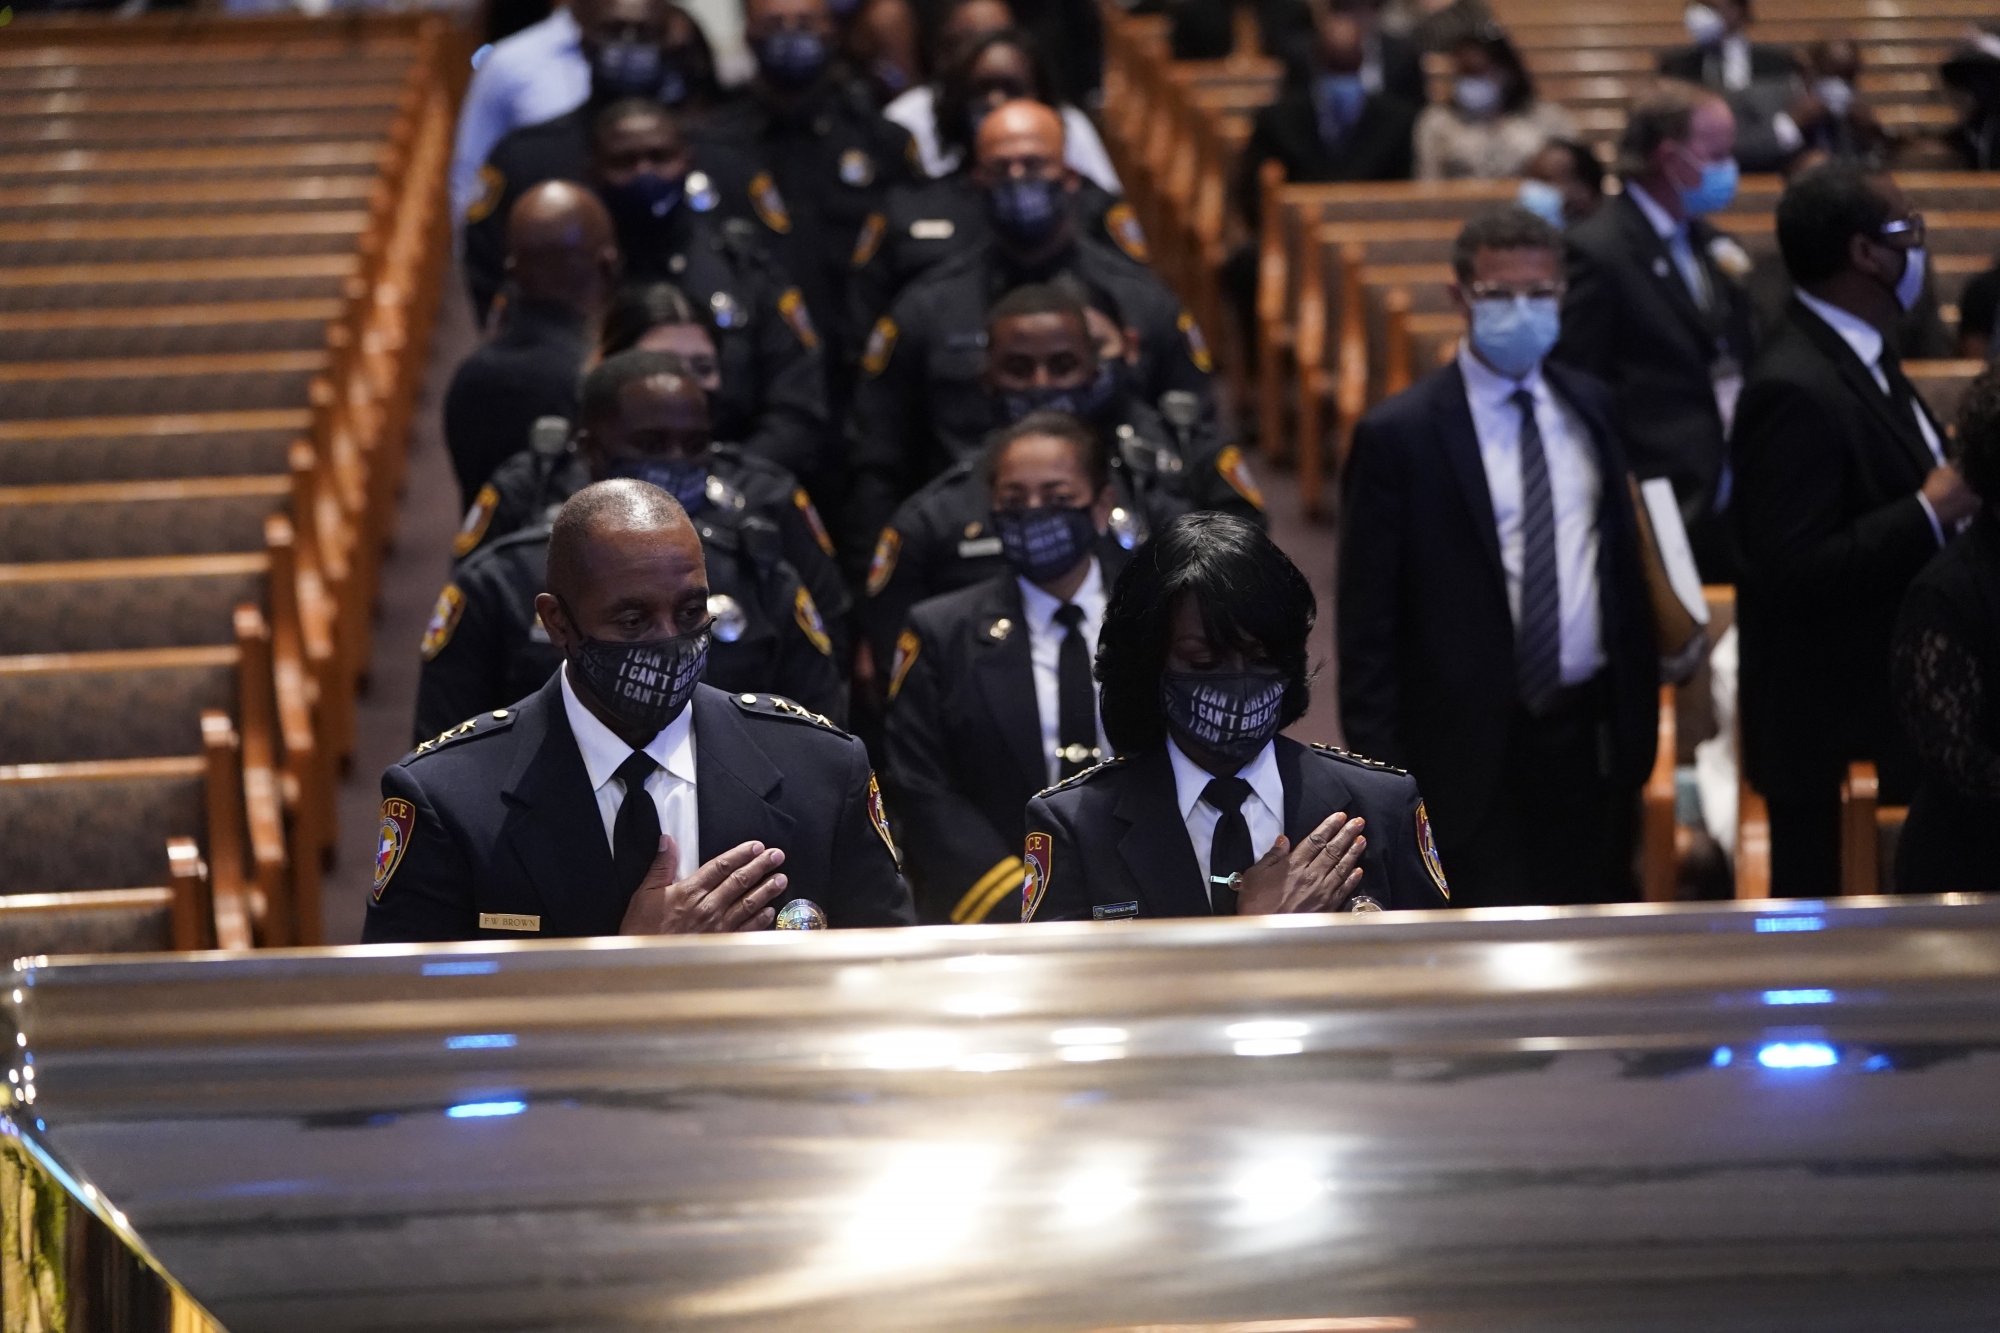 epa08475194 Members of the Texas Southern University police department pause during a funeral service for George Floyd at the Fountain of Praise church, Houston, Texas, USA, 09 June 2020. A bystander's video posted online on 25 May, appeared to show George Floyd, 46, pleading with arresting officers that he couldn't breathe as an officer knelt on his neck. The unarmed Black man later died in police custody and all four officers involved in the arrest have been charged and arrested.  EPA/David J. Phillip / POOL
ArcInfo